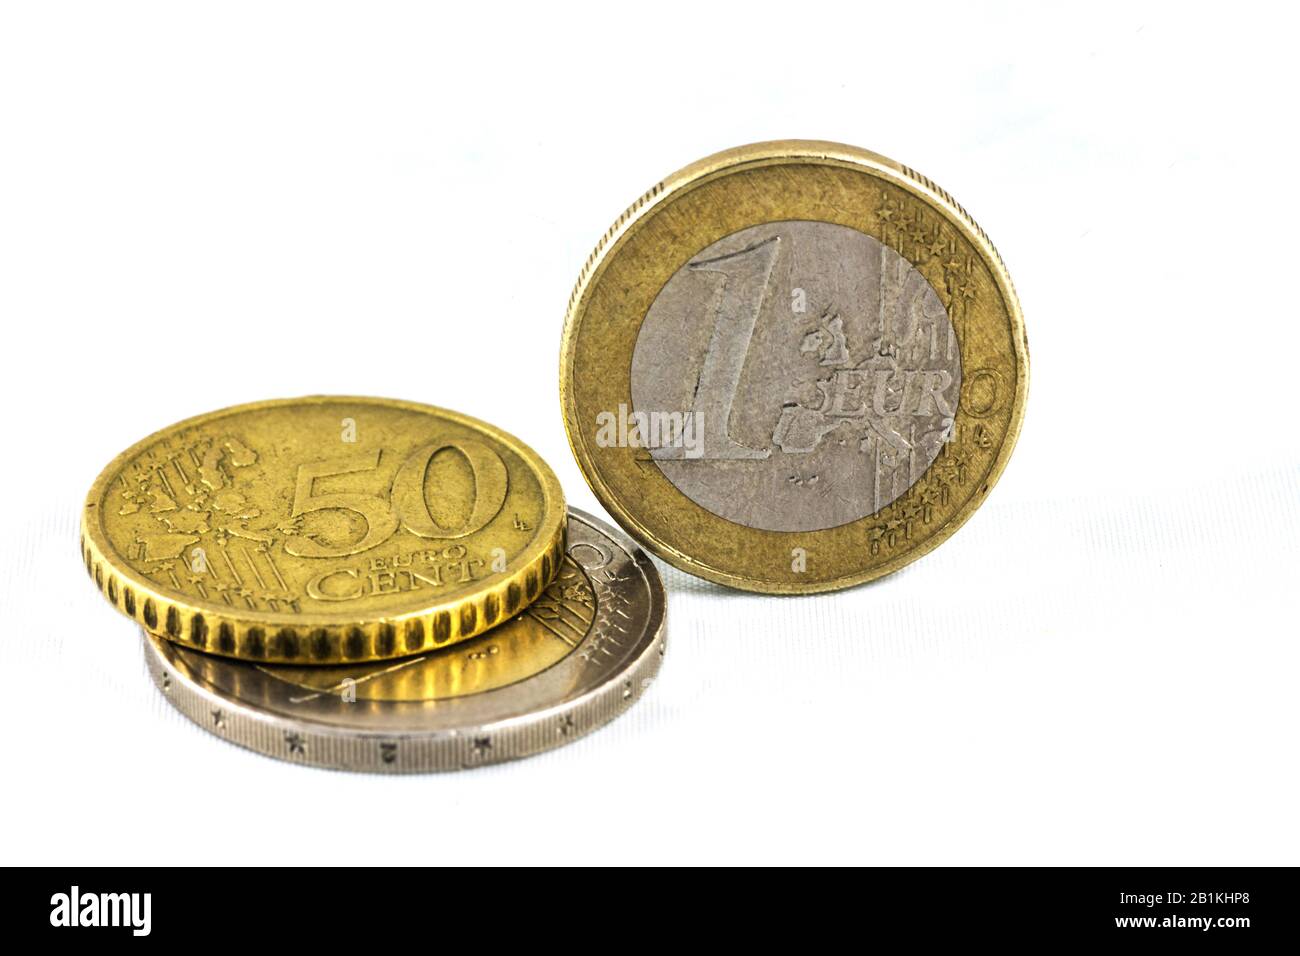 Euro coins hand rolling paper 50 pieces from 1 cent to 2 EUR